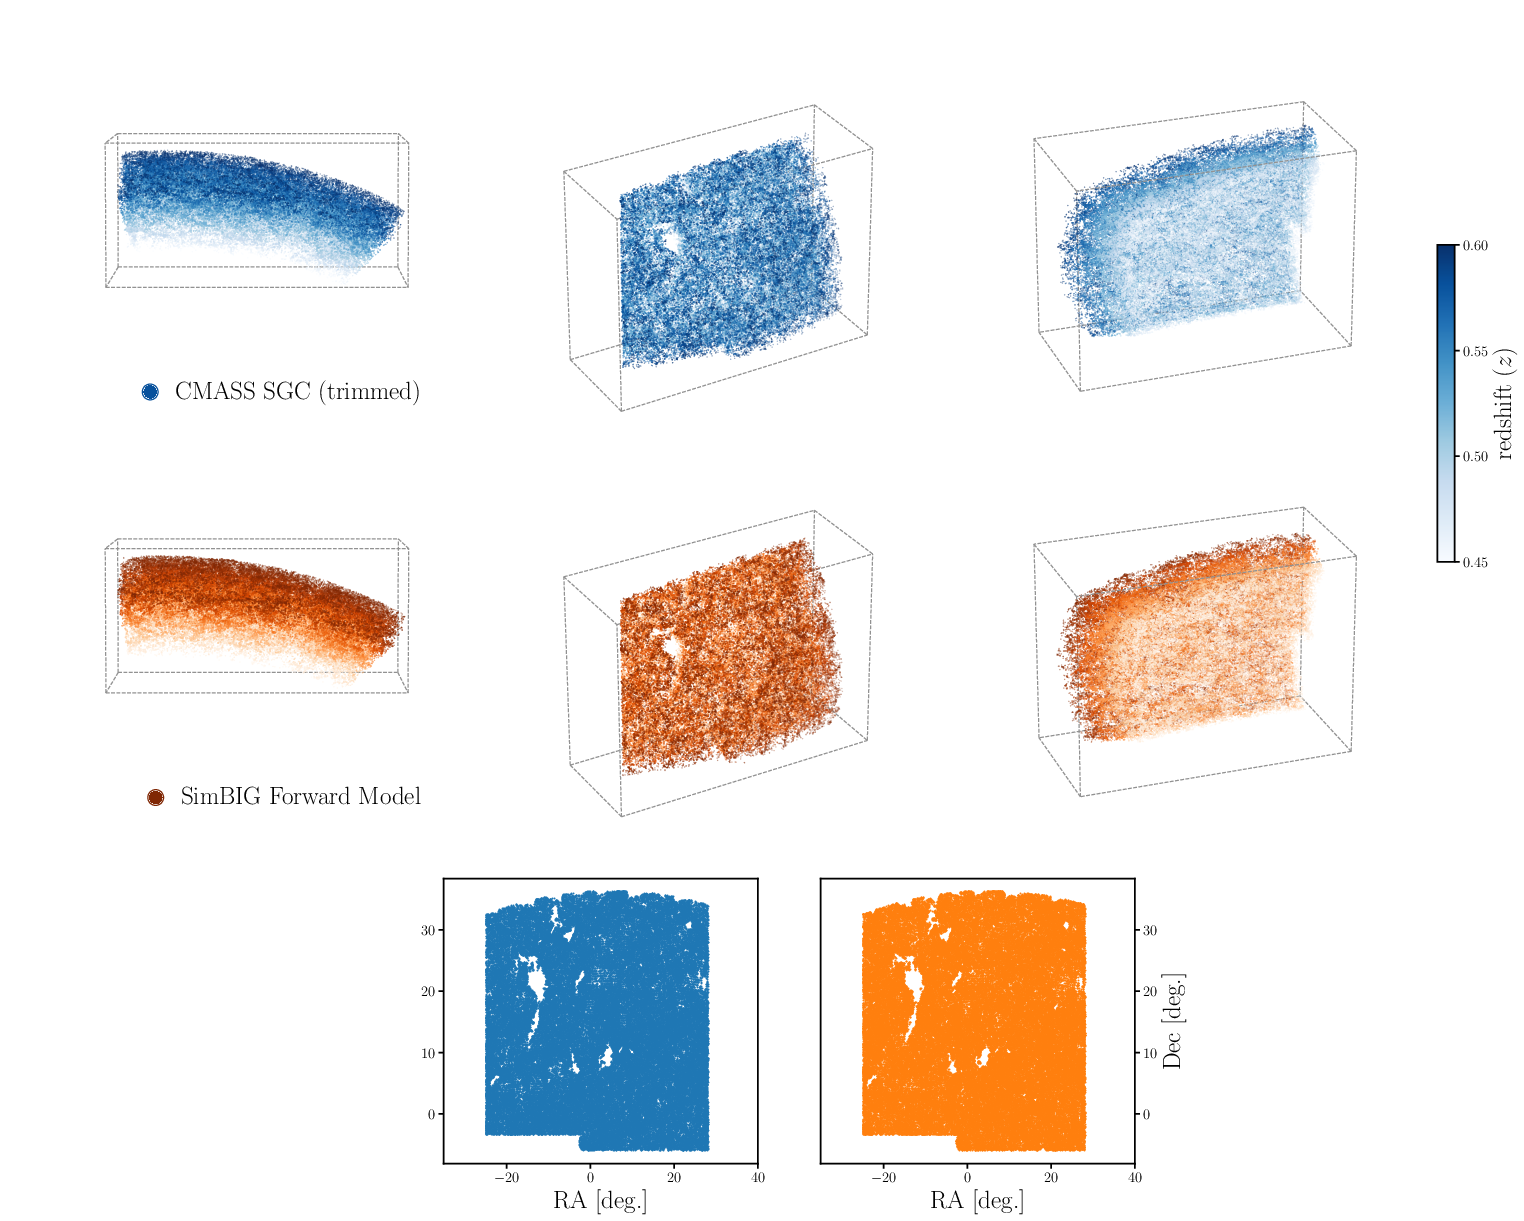 The \simbig~forward model produces simulated galaxy samples with the same survey geometry and observational systematics as the observed BOSS CMASS SGC galaxy sample. We present the 3D distribution of the galaxies from three different viewing angles. The colormap represents the redshift of the galaxies. In the top set of panels, we present the distribution of galaxies in the CMASS sample. In the bottom, we present the distribution of a simulated galaxy sample, generated from our forward model. The \simbig~galaxy samples are constructed from {\sc Quijote} $N$-body dark matter simulations using an HOD model that populates dark matter halos identified using the {\sc Rockstar} algorithm. The 3D distributions illustrate that our forward model is able to generate galaxy distributions that are difficult to statistically distinguish from observations. For more comparisons of the 3D distributions, we refer readers to \href{https://youtube.com/playlist?list=PLQk8Faa2x0twK3fgs55ednnHD2vbIzo4z}{\faGlobe}.